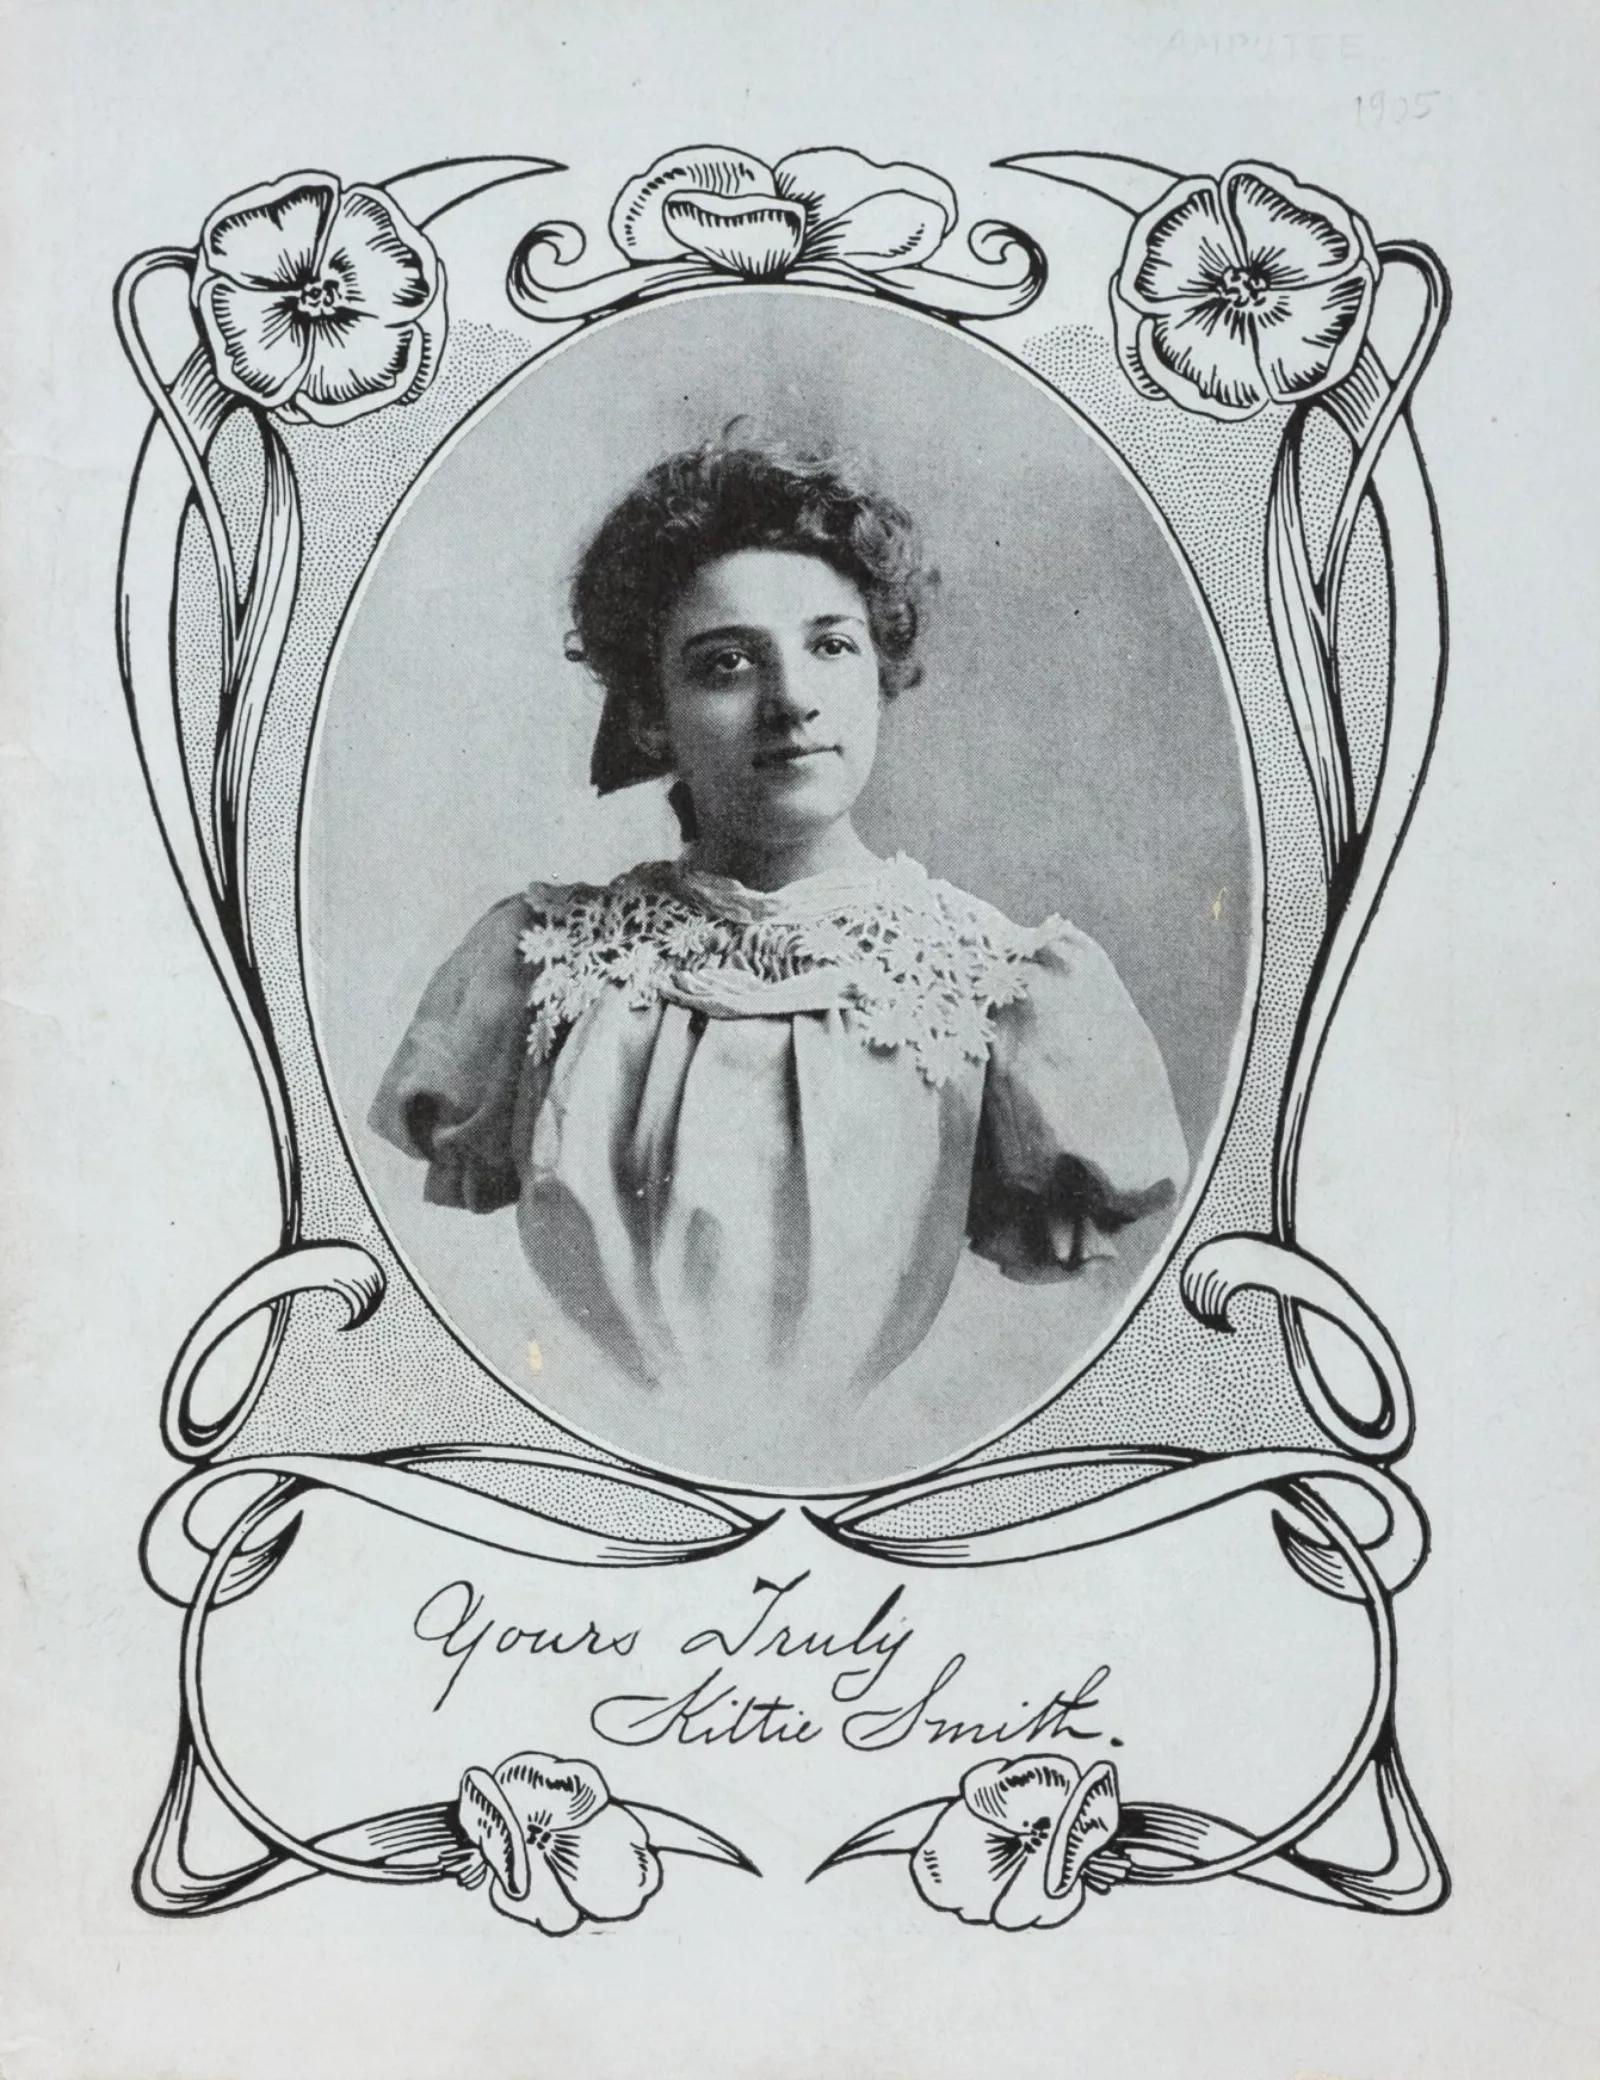 A circular portrait of Kittie Smith surrounded by decorative flowers and borders. Below her portrait is her signature.